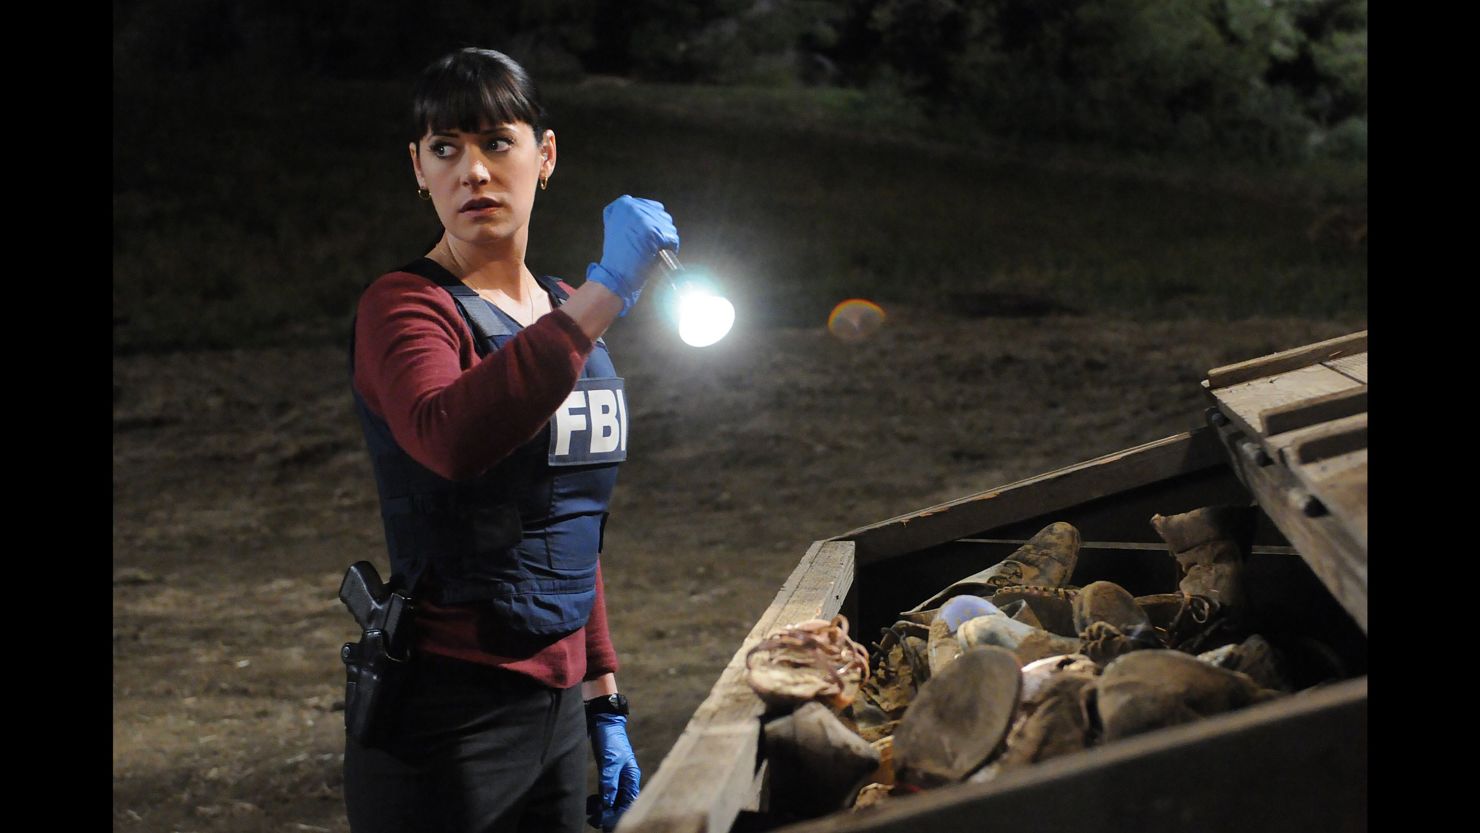 Actress Paget Brewster will once again play Agent Emily Prentiss on "Criminal Minds." 